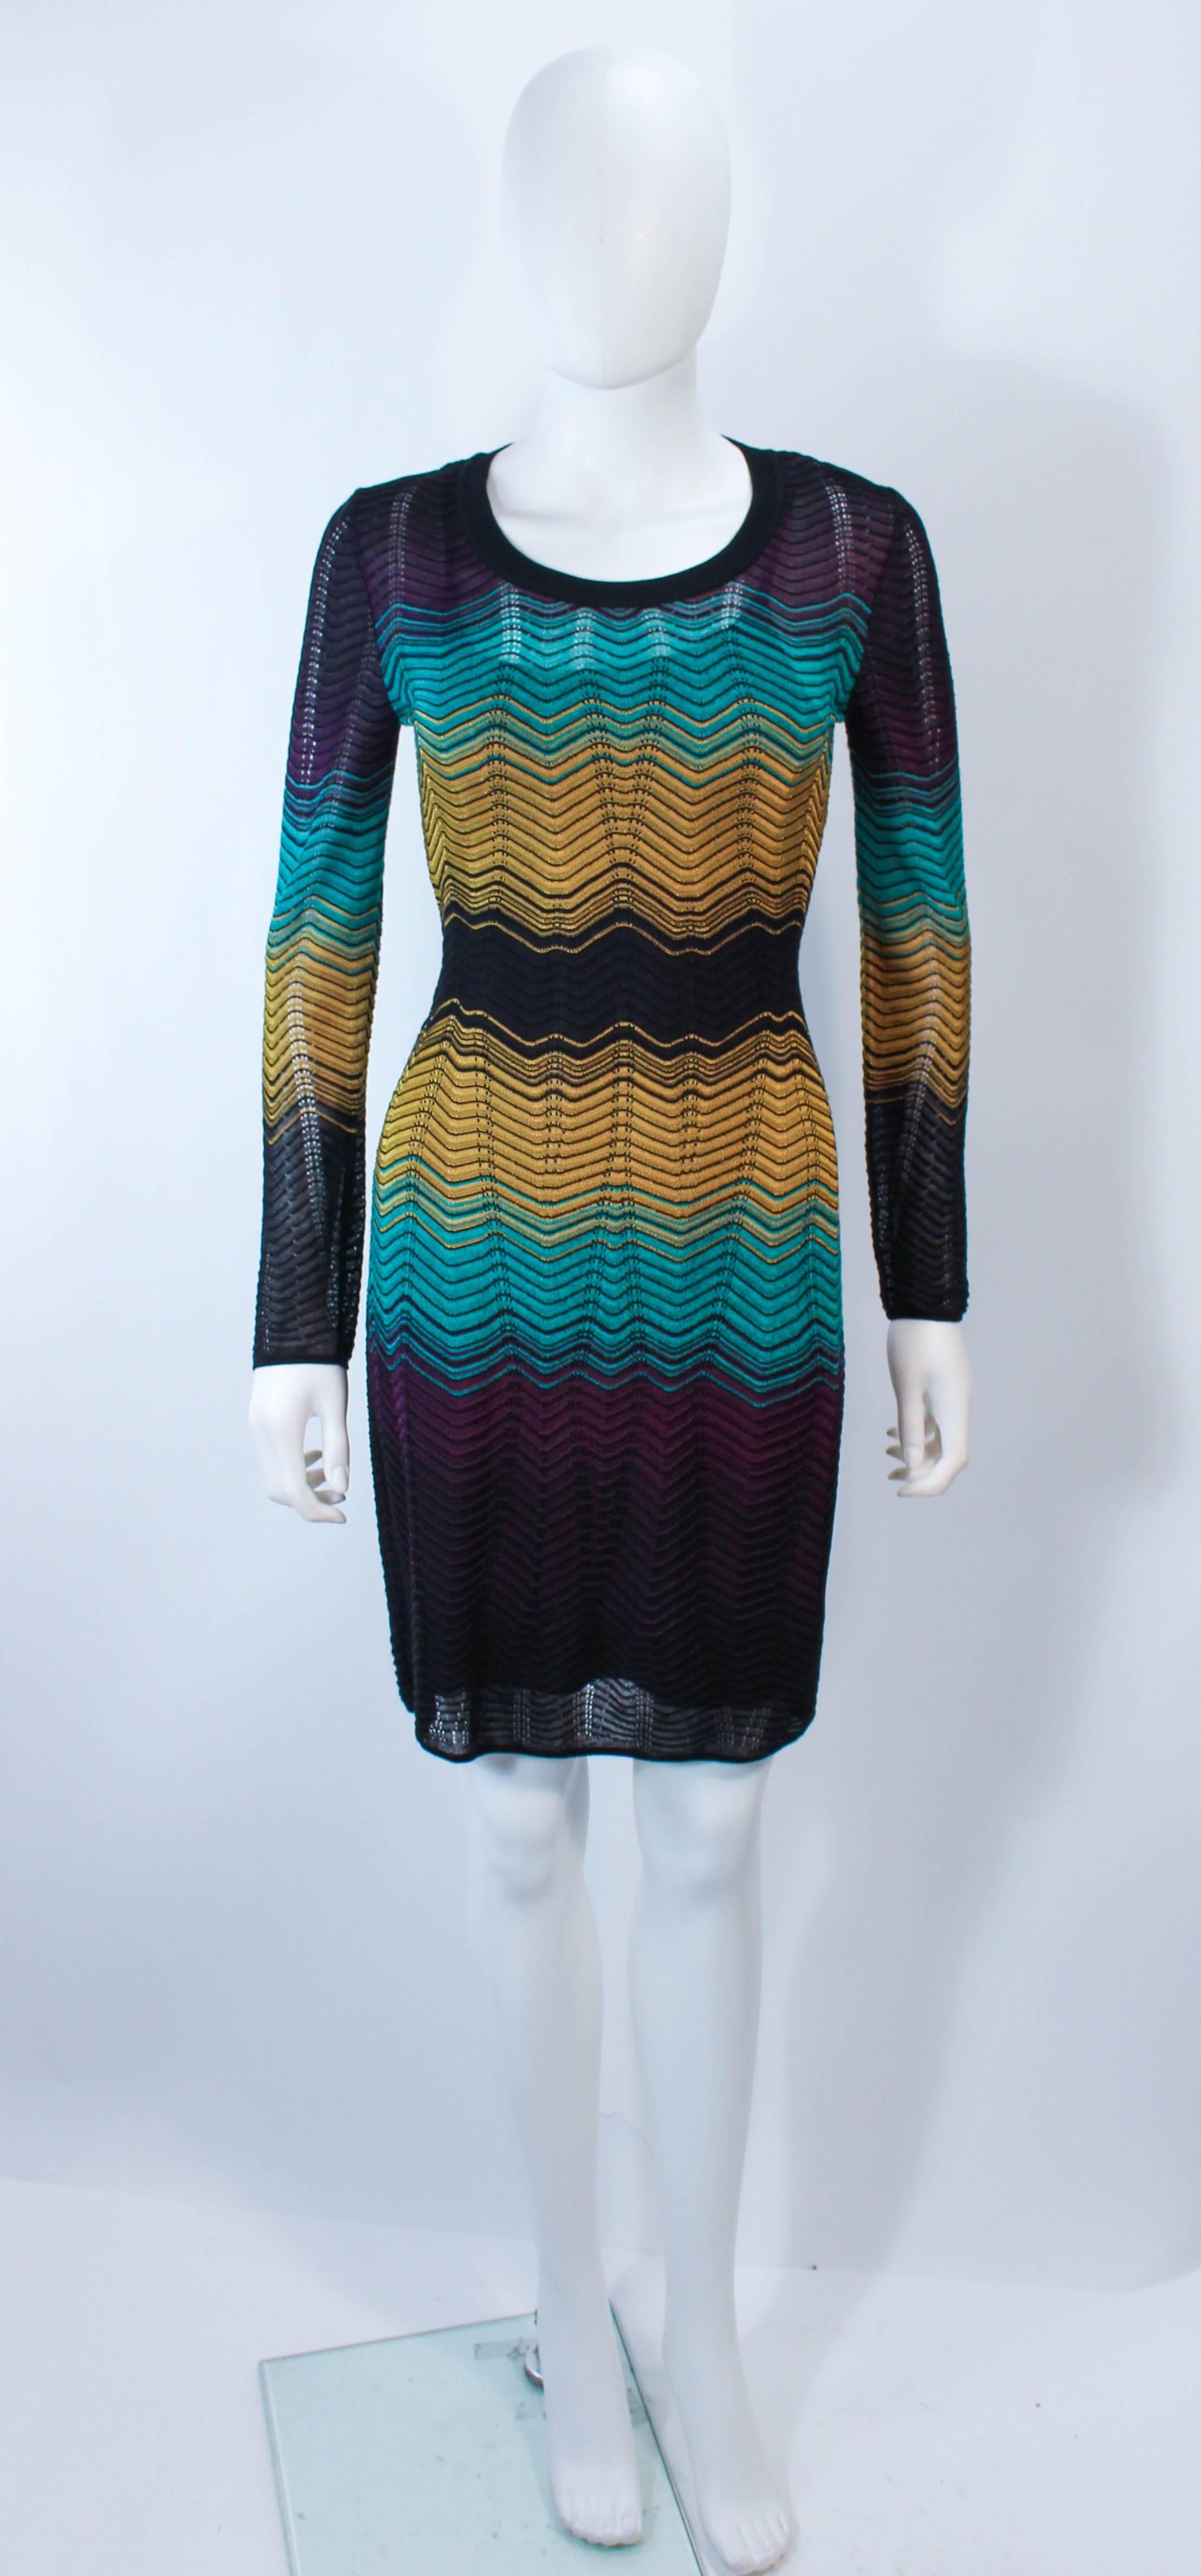 This Missoni dress is composed of a navy and mustard stretch knit. features a zig zag print and pull over style. In excellent unused condition with original tags.

**Please cross-reference measurements for personal accuracy. Size in description box